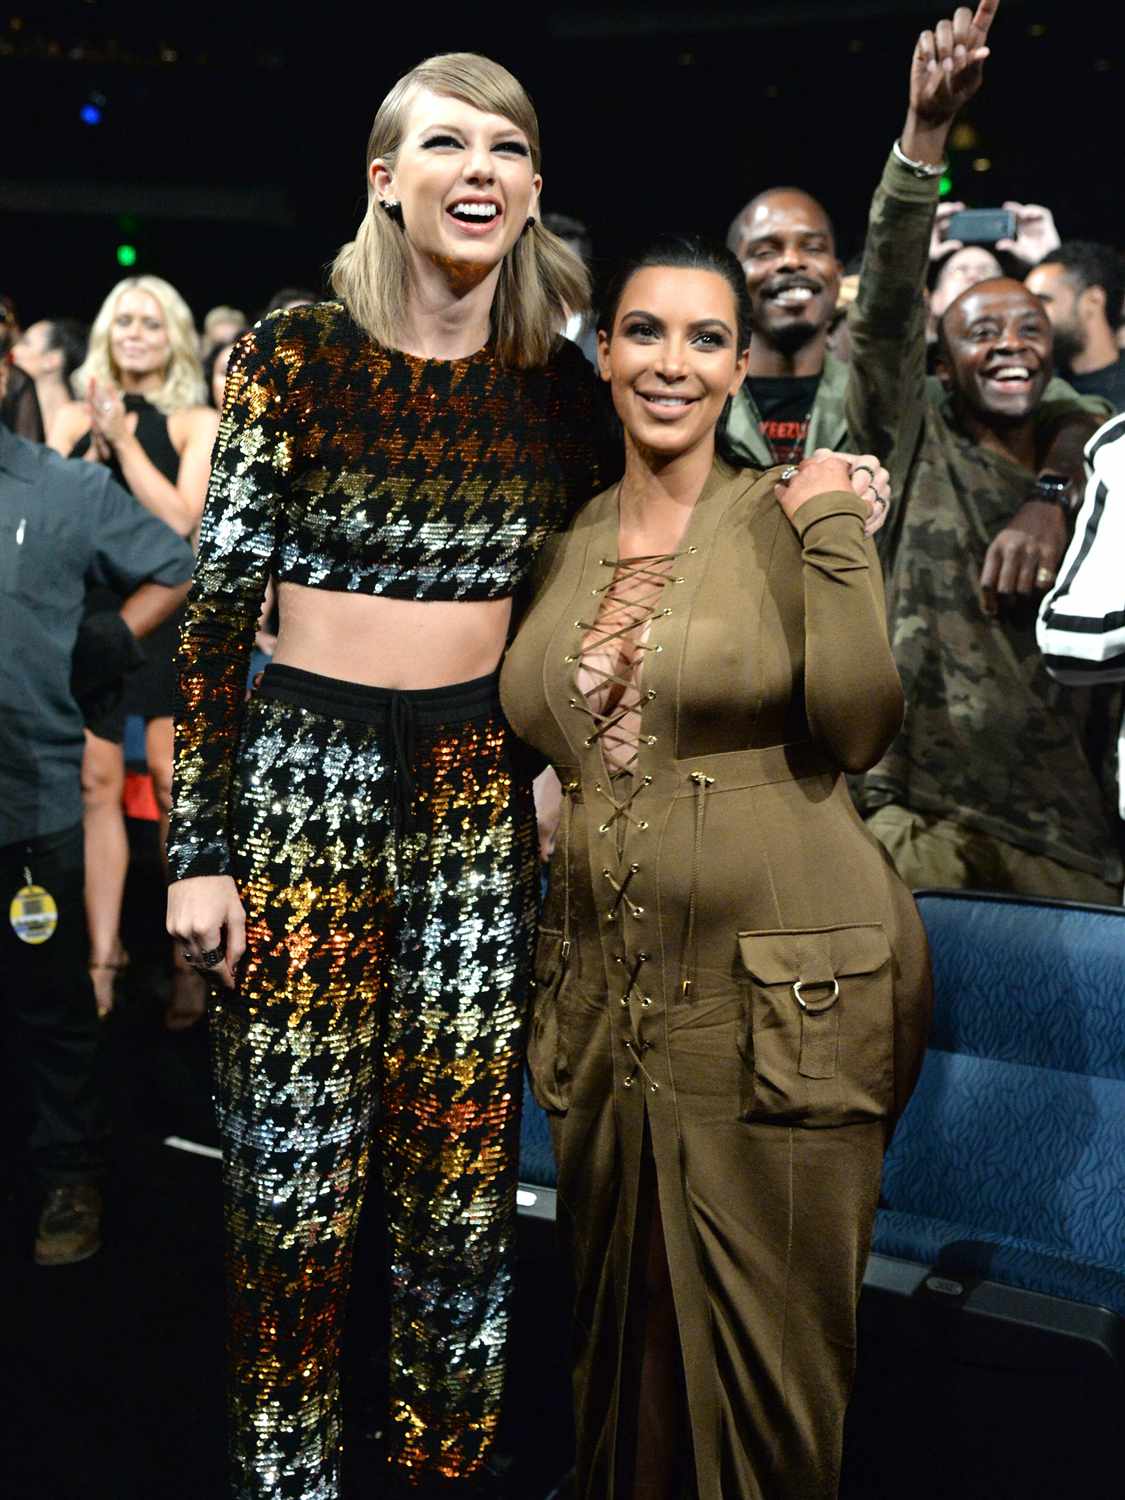 Taylor Swift and Kim Kardashian West attend the 2015 MTV Video Music Awards at Microsoft Theater on August 30, 2015 in Los Angeles, California